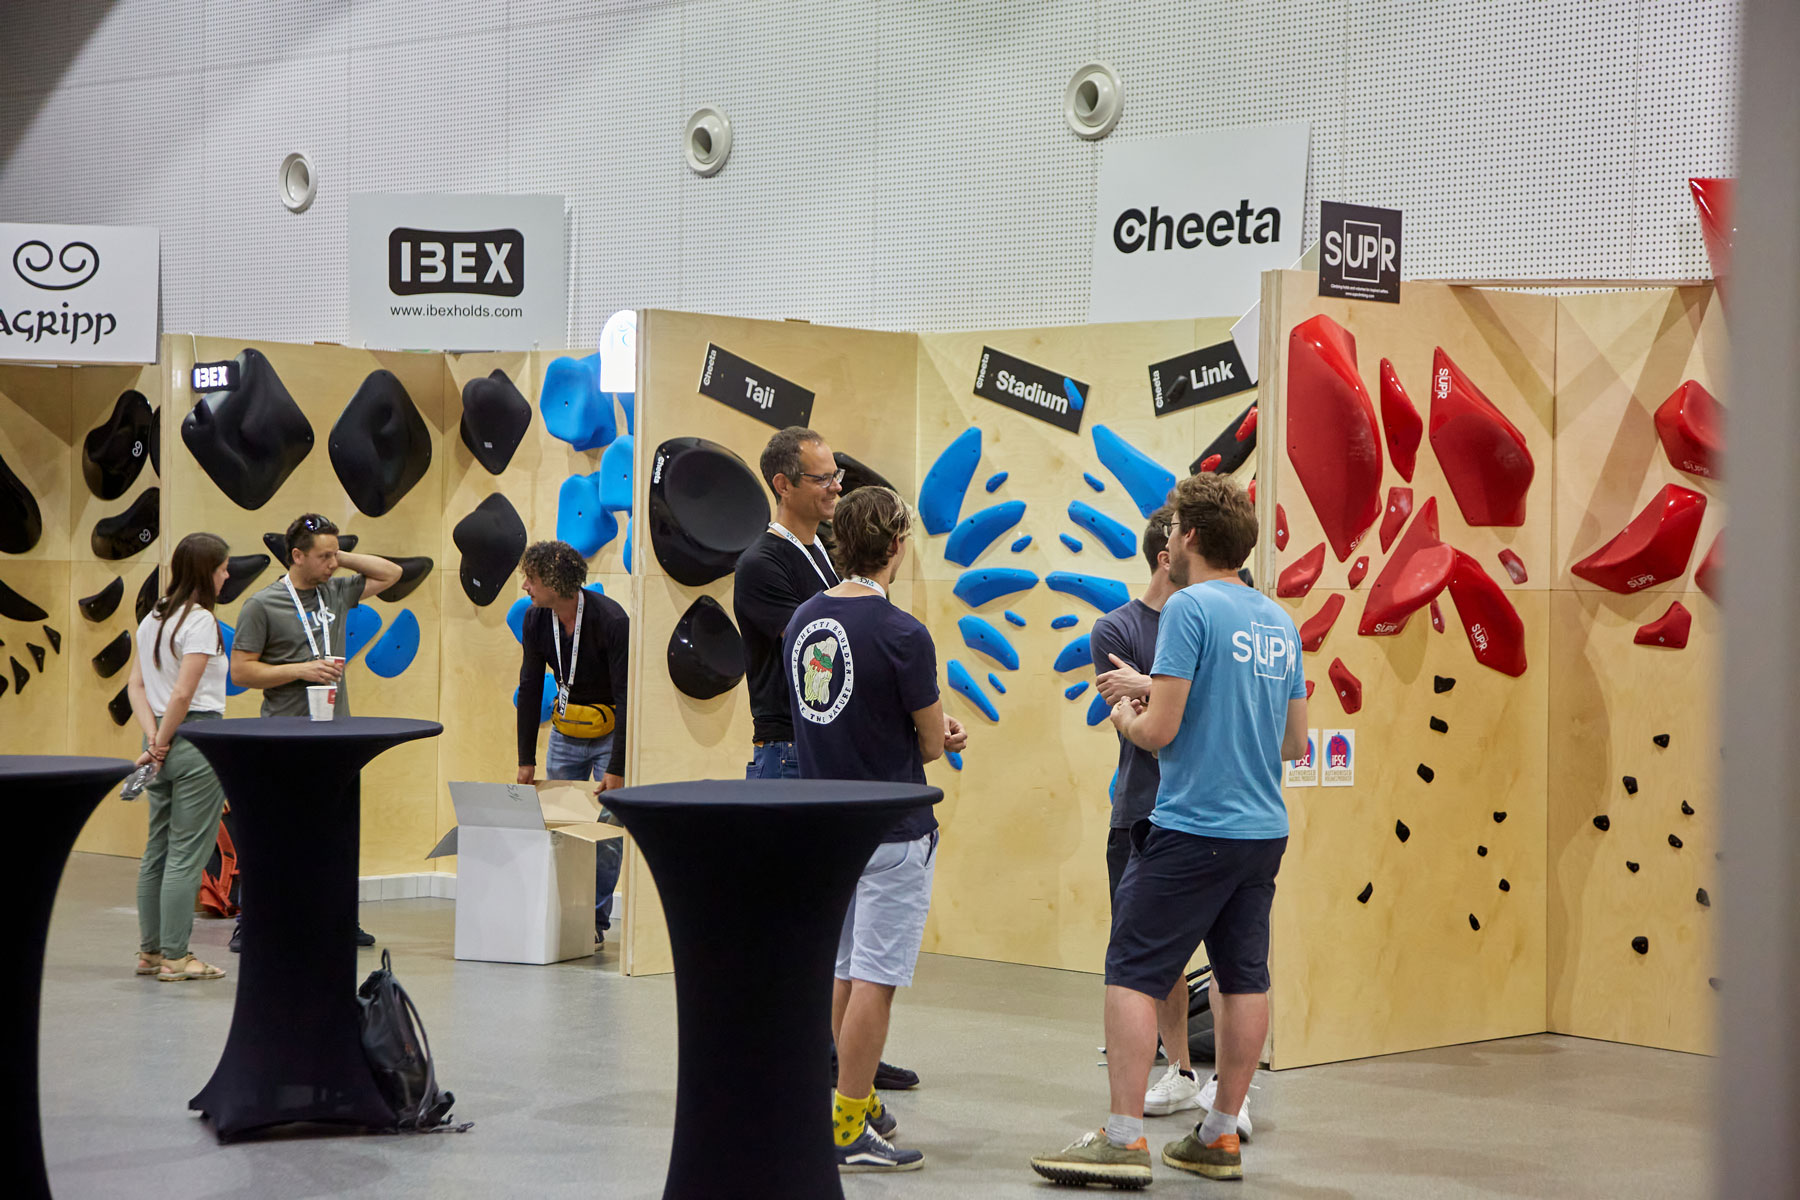 Climbing holds exhibition